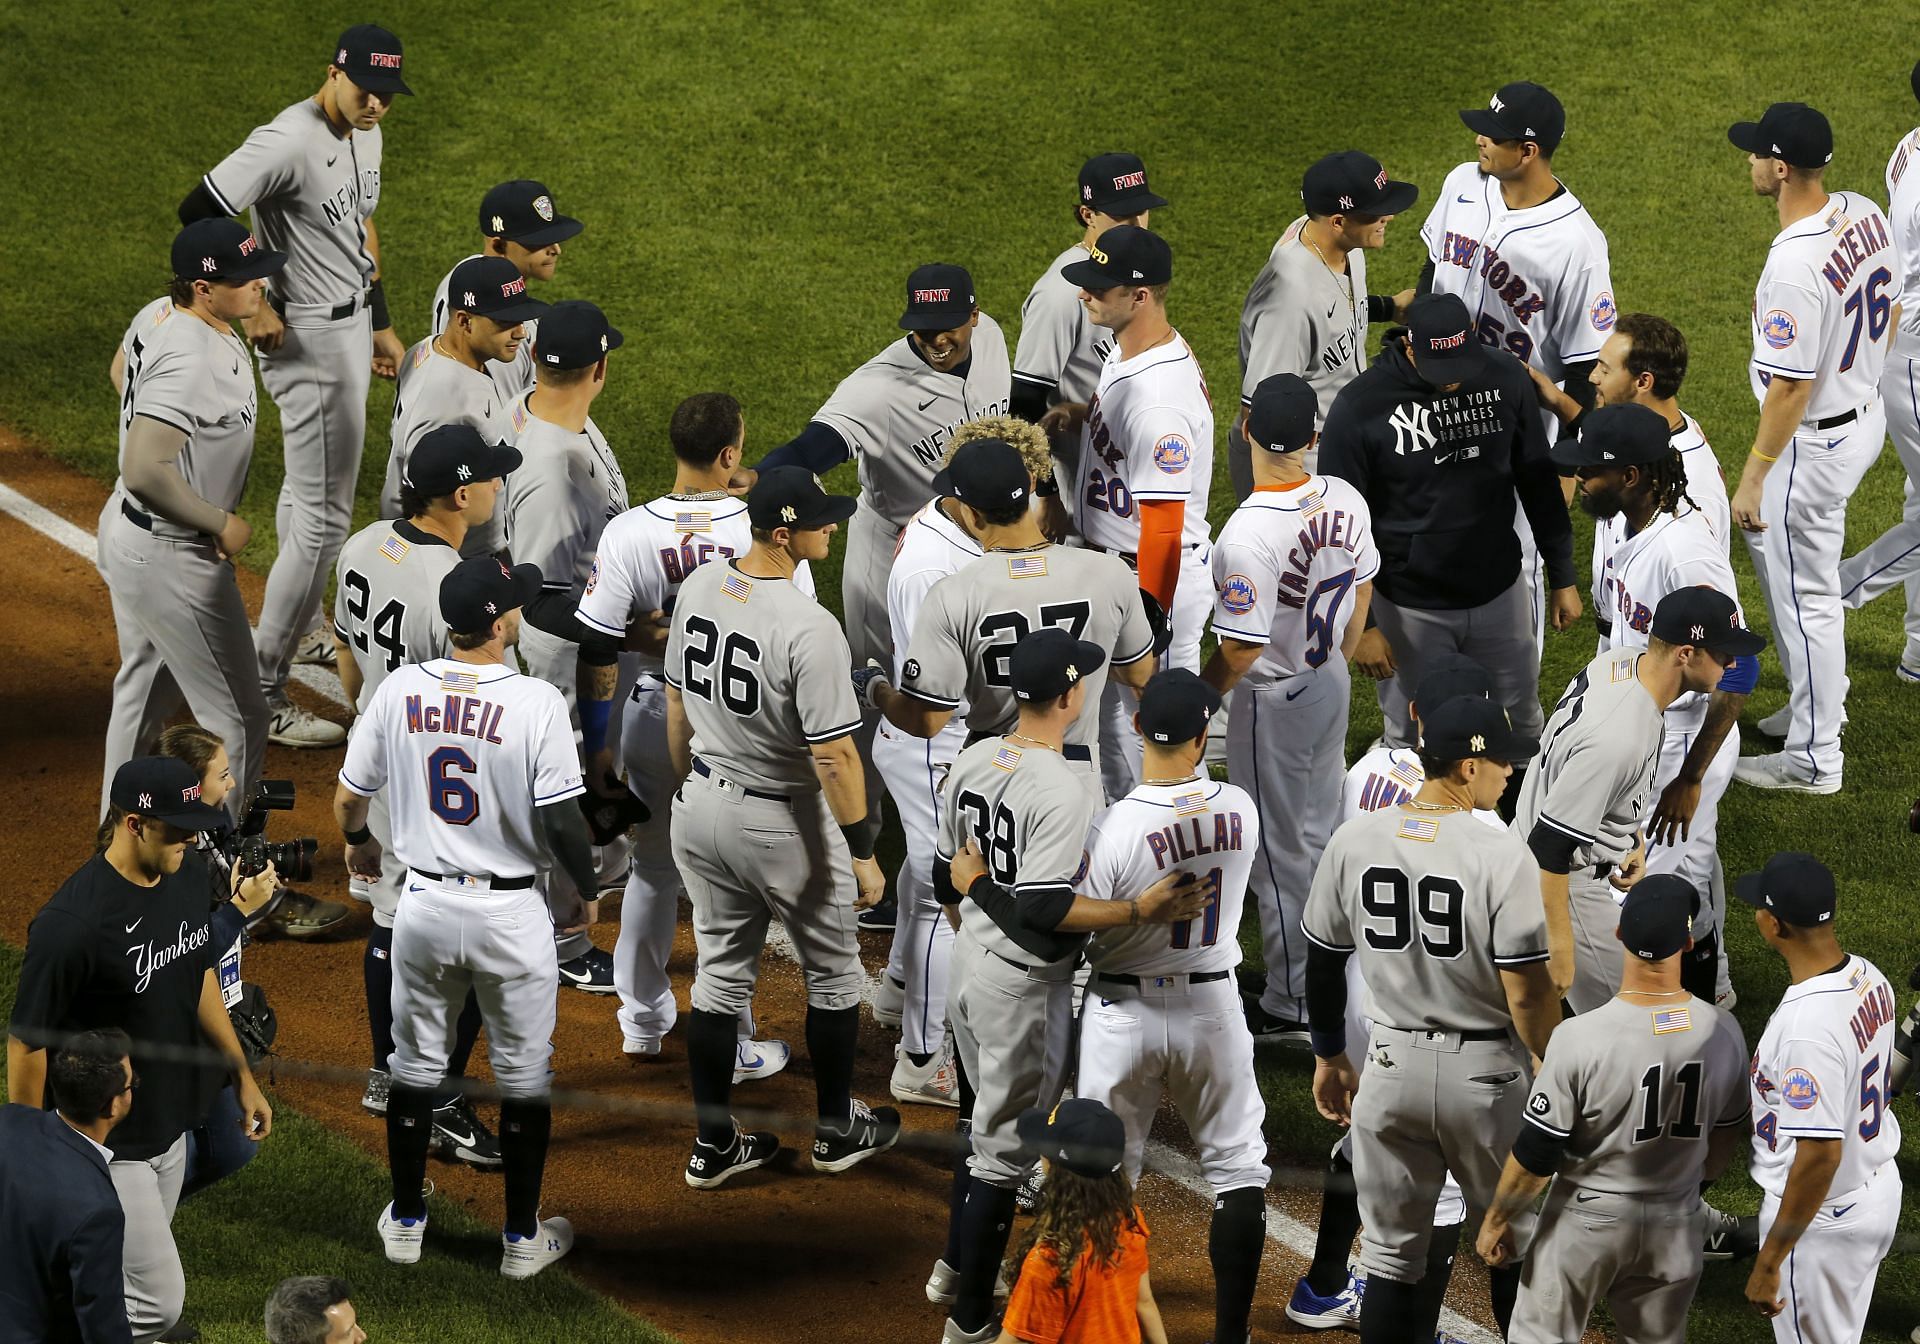 New York Yankees vs New York Mets: Which New York team has the